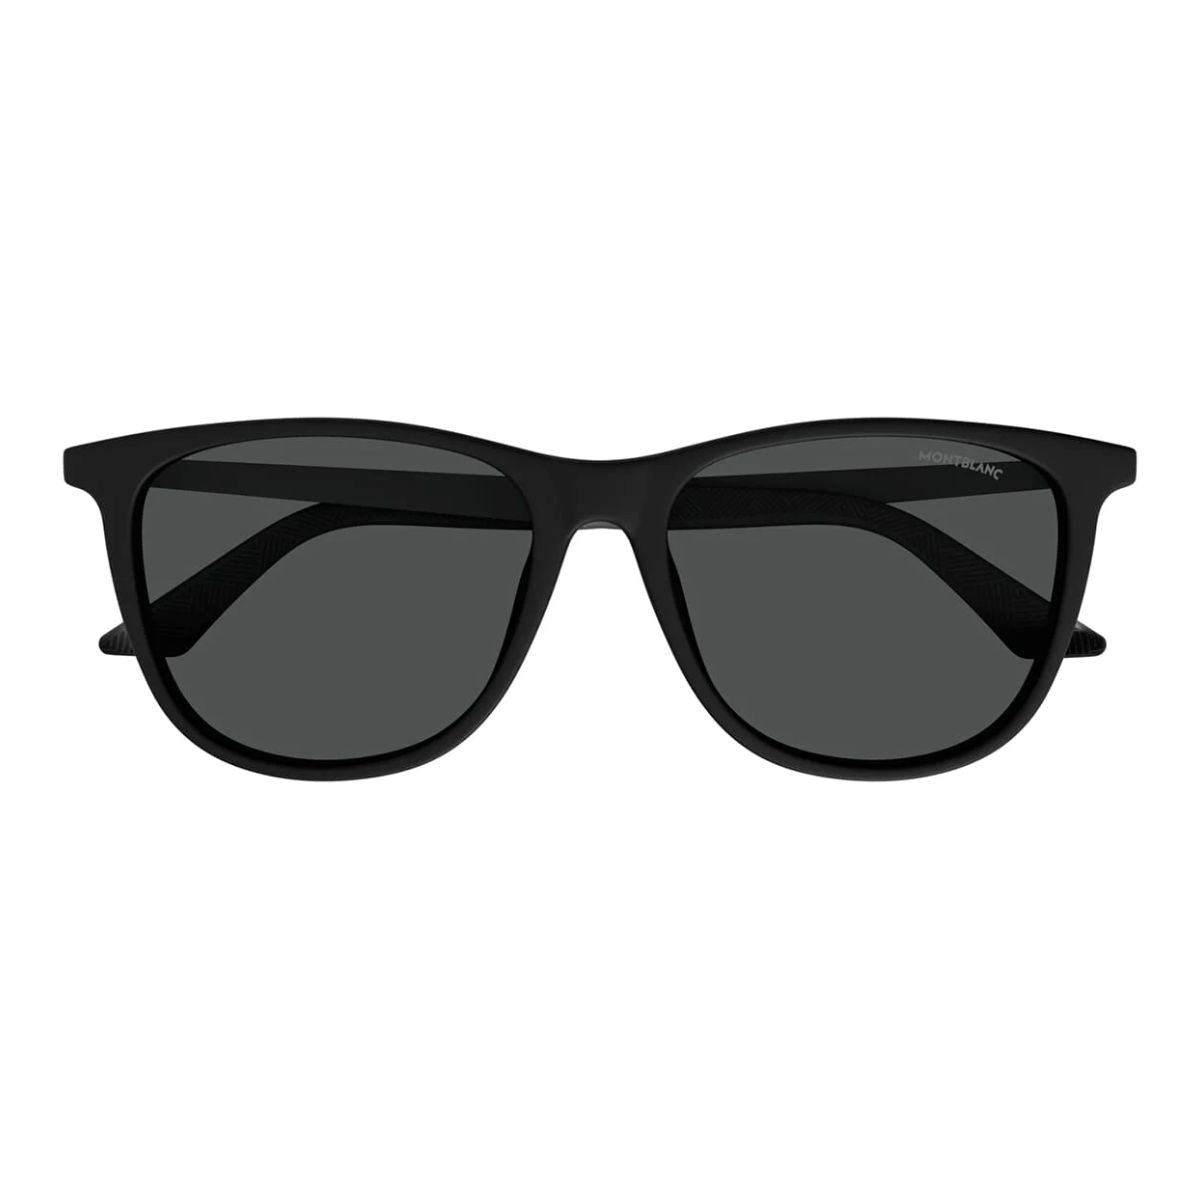 "Buy Montblanc Black Oval Sunglasses For Mens At Optorium"